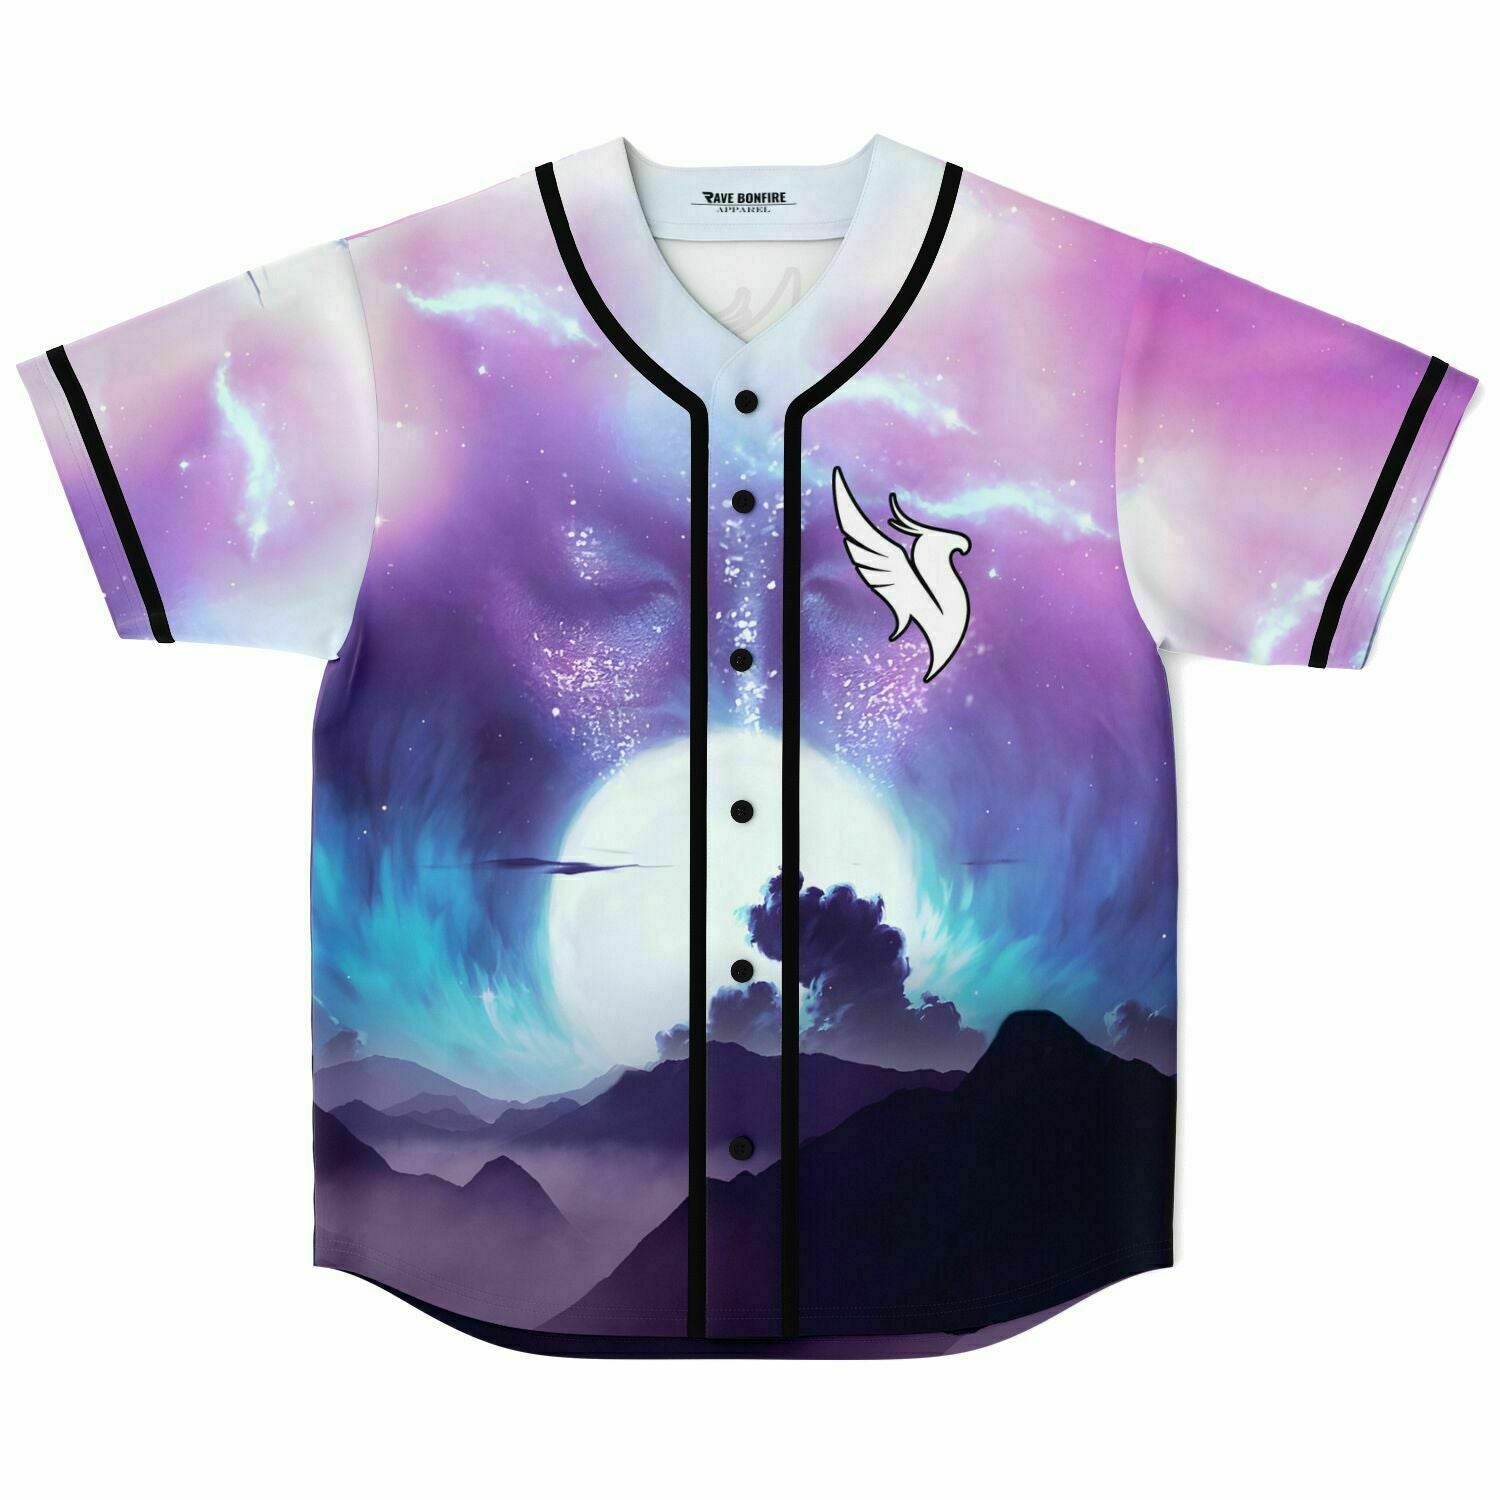 a baseball jersey with an image of the moon and stars by Illenium